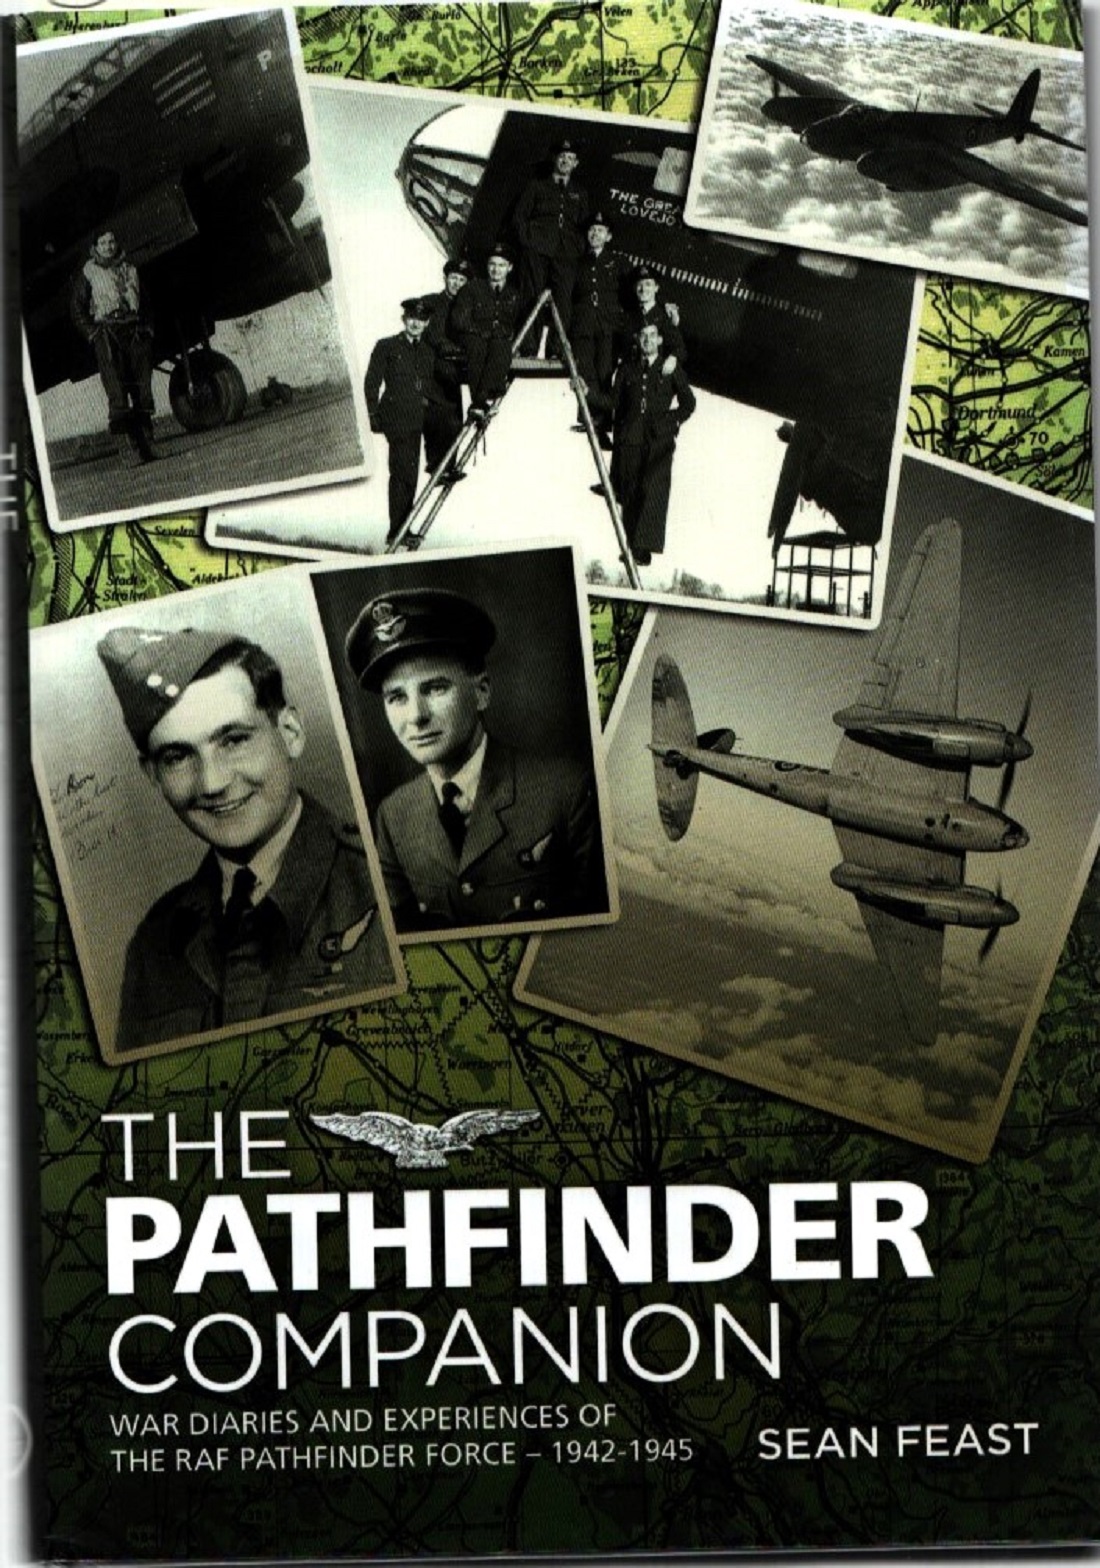 The Pathfinder Companion: War Diaries and Experiences of the RAF Pathfinder Force-1942-1945 by - Bild 5 aus 9